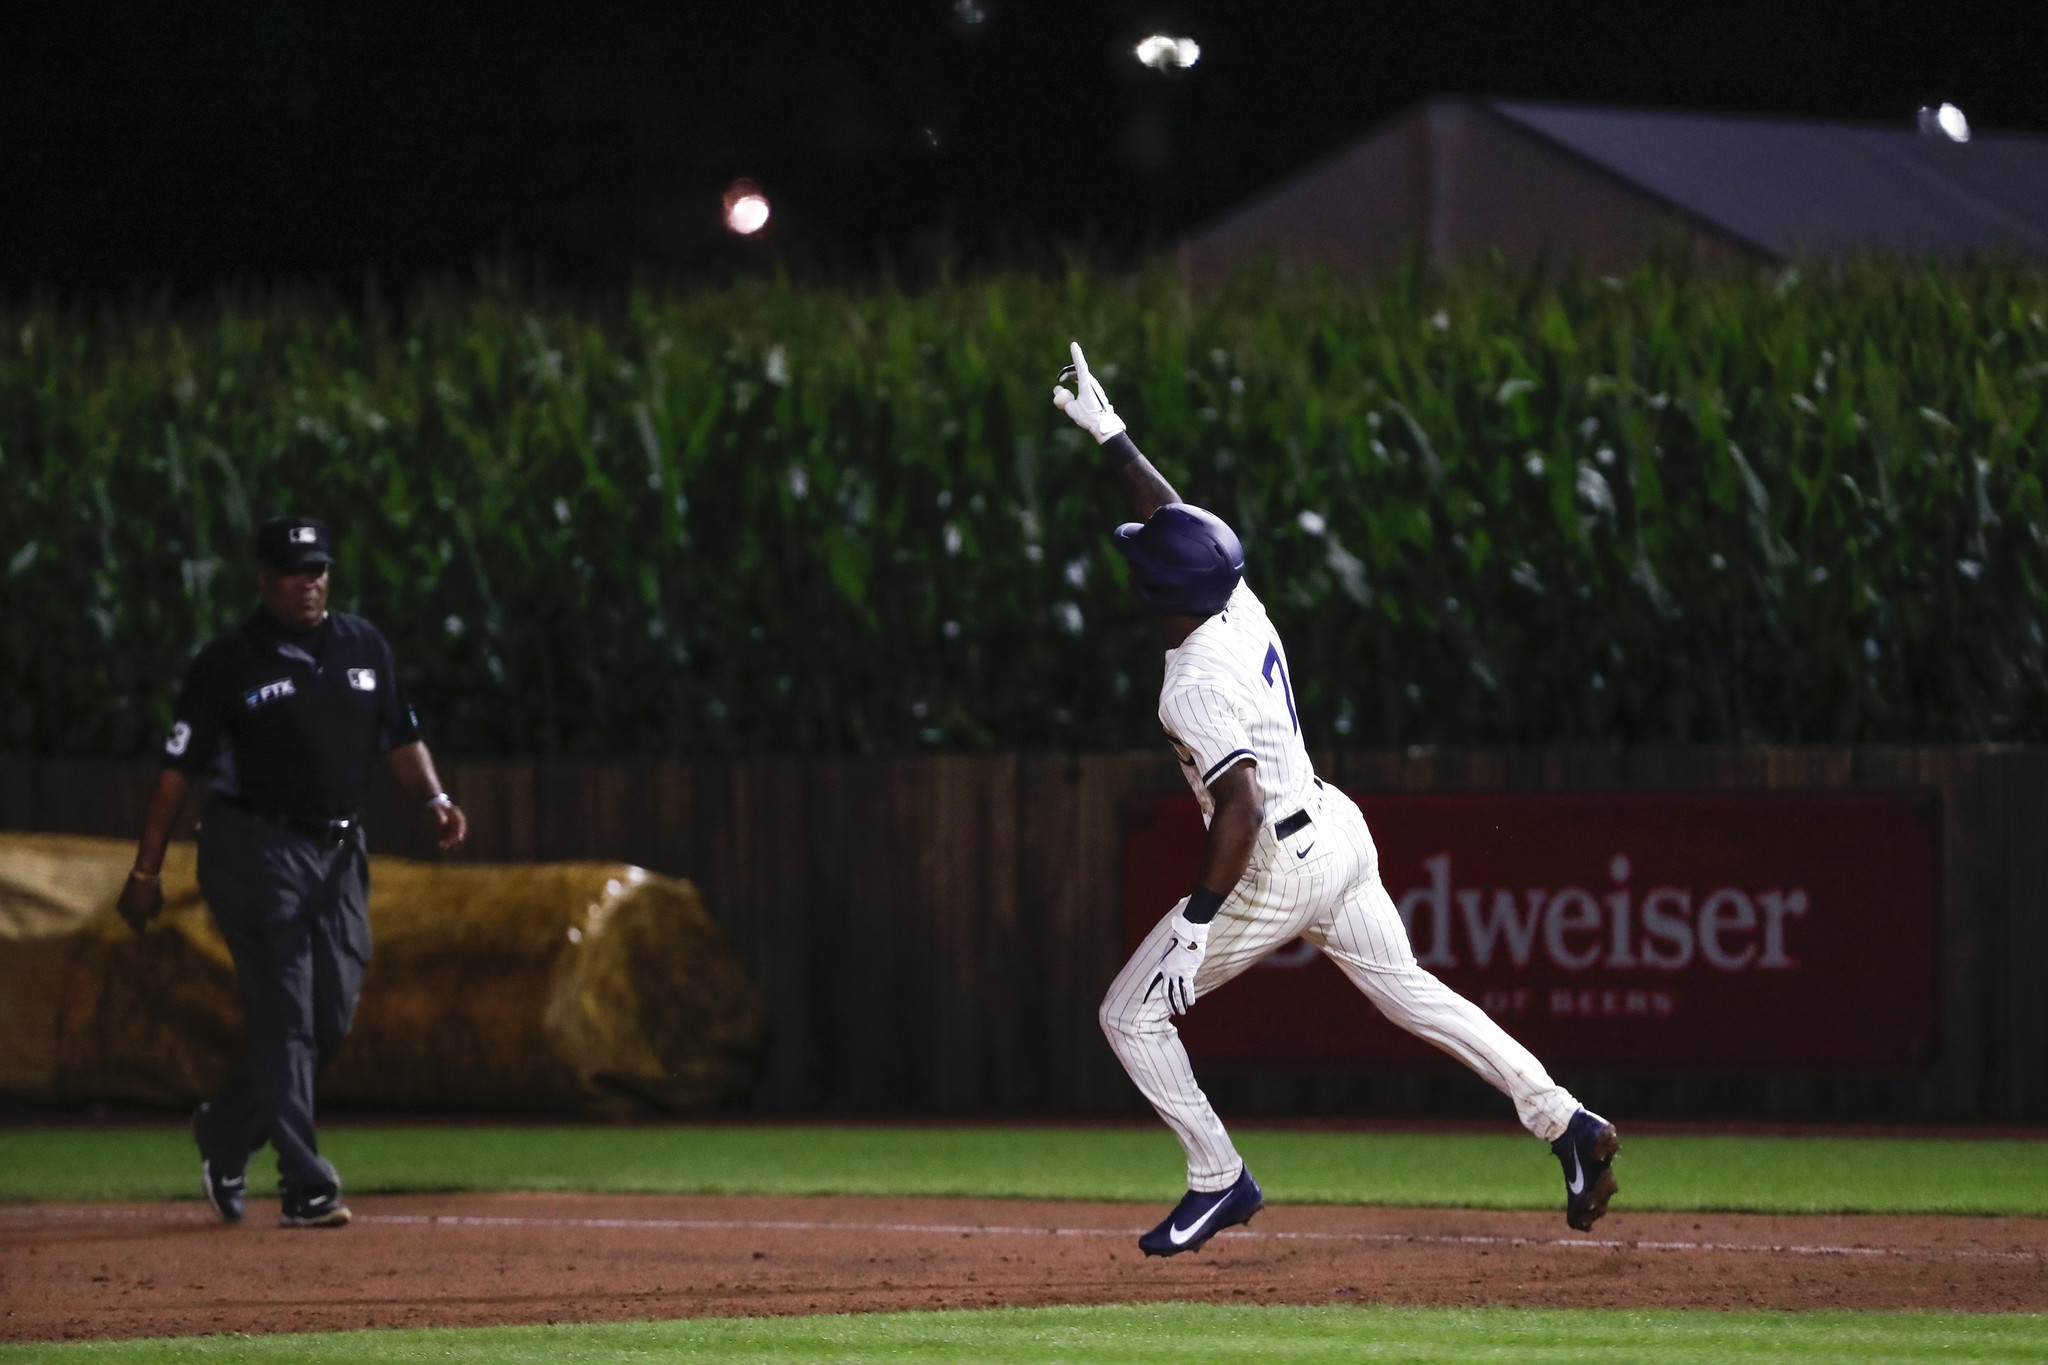 Field of Dreams experience was a home run for White Sox - Chicago Sun-Times